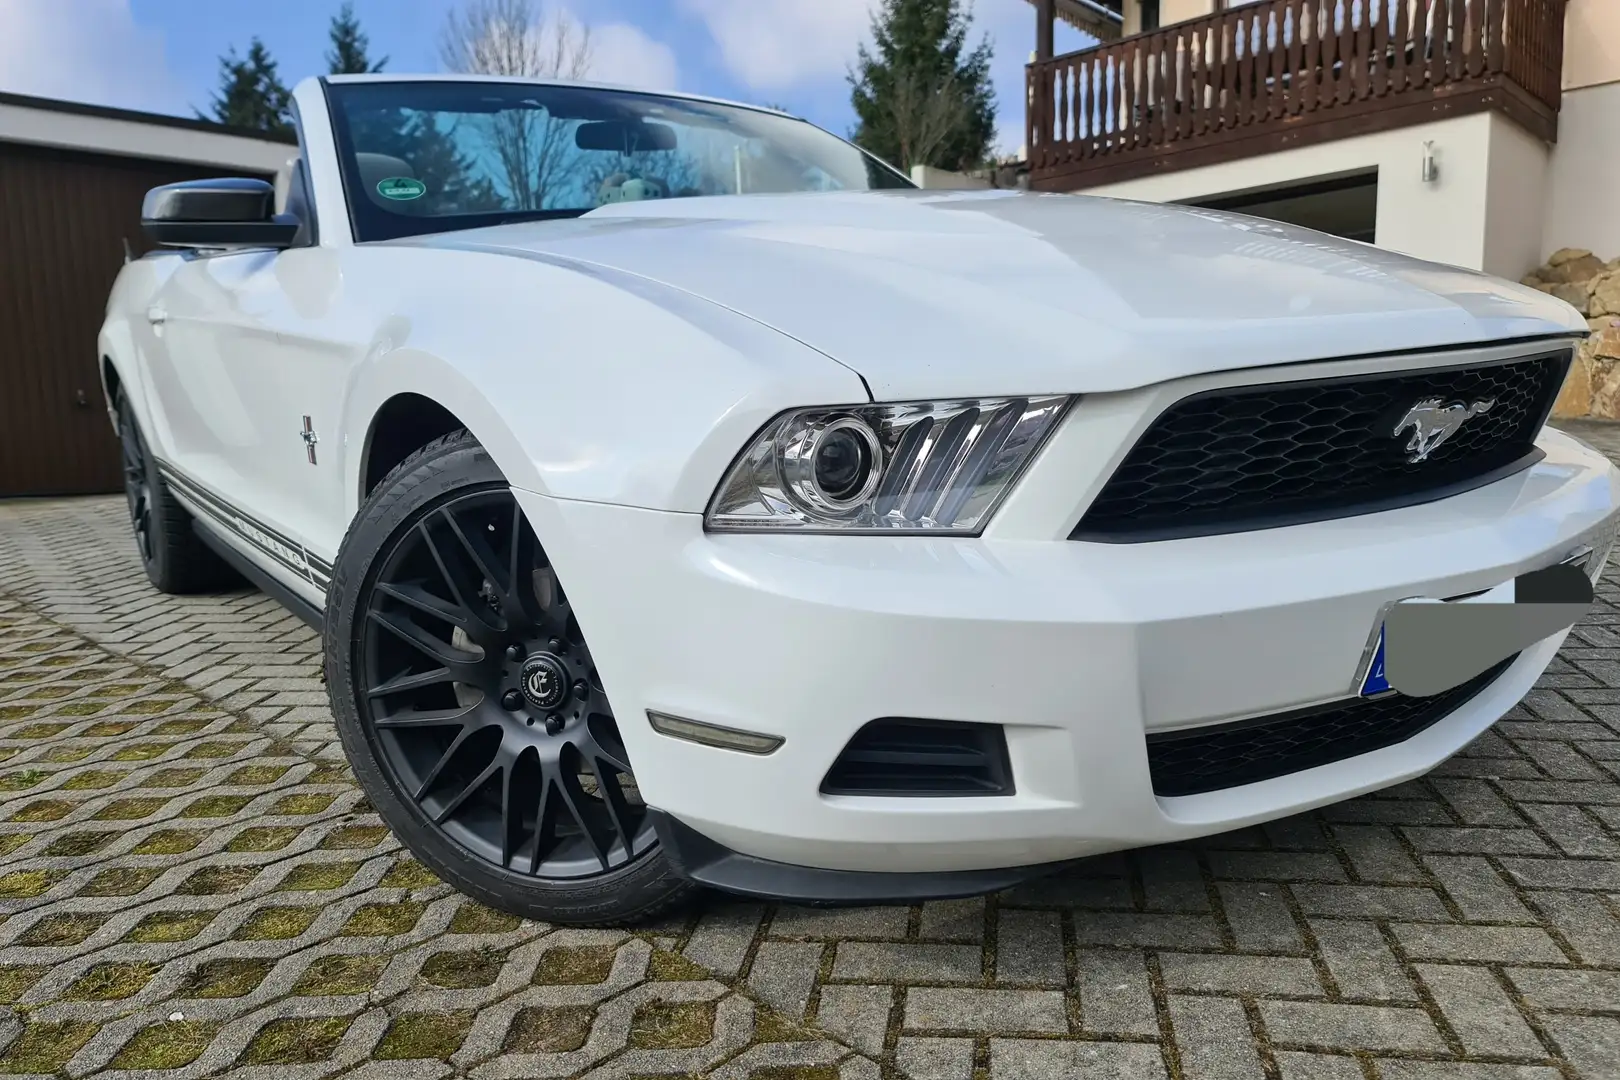 Ford Mustang V6, Modell 2010, Base Weiß - 2